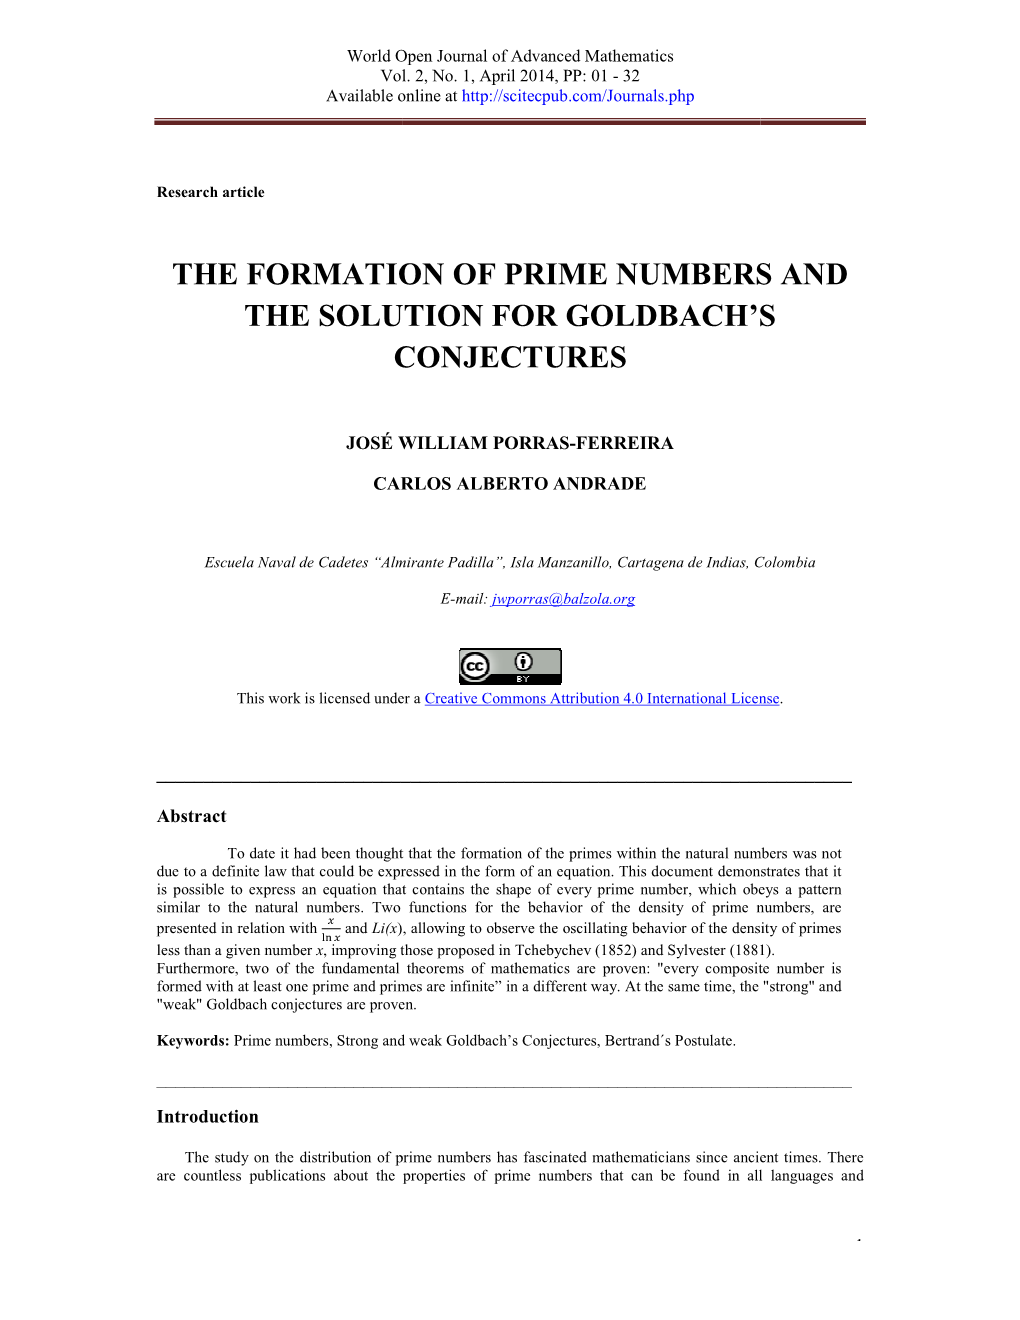 The Formation of Prime Numbers and the Solution for Goldbach's